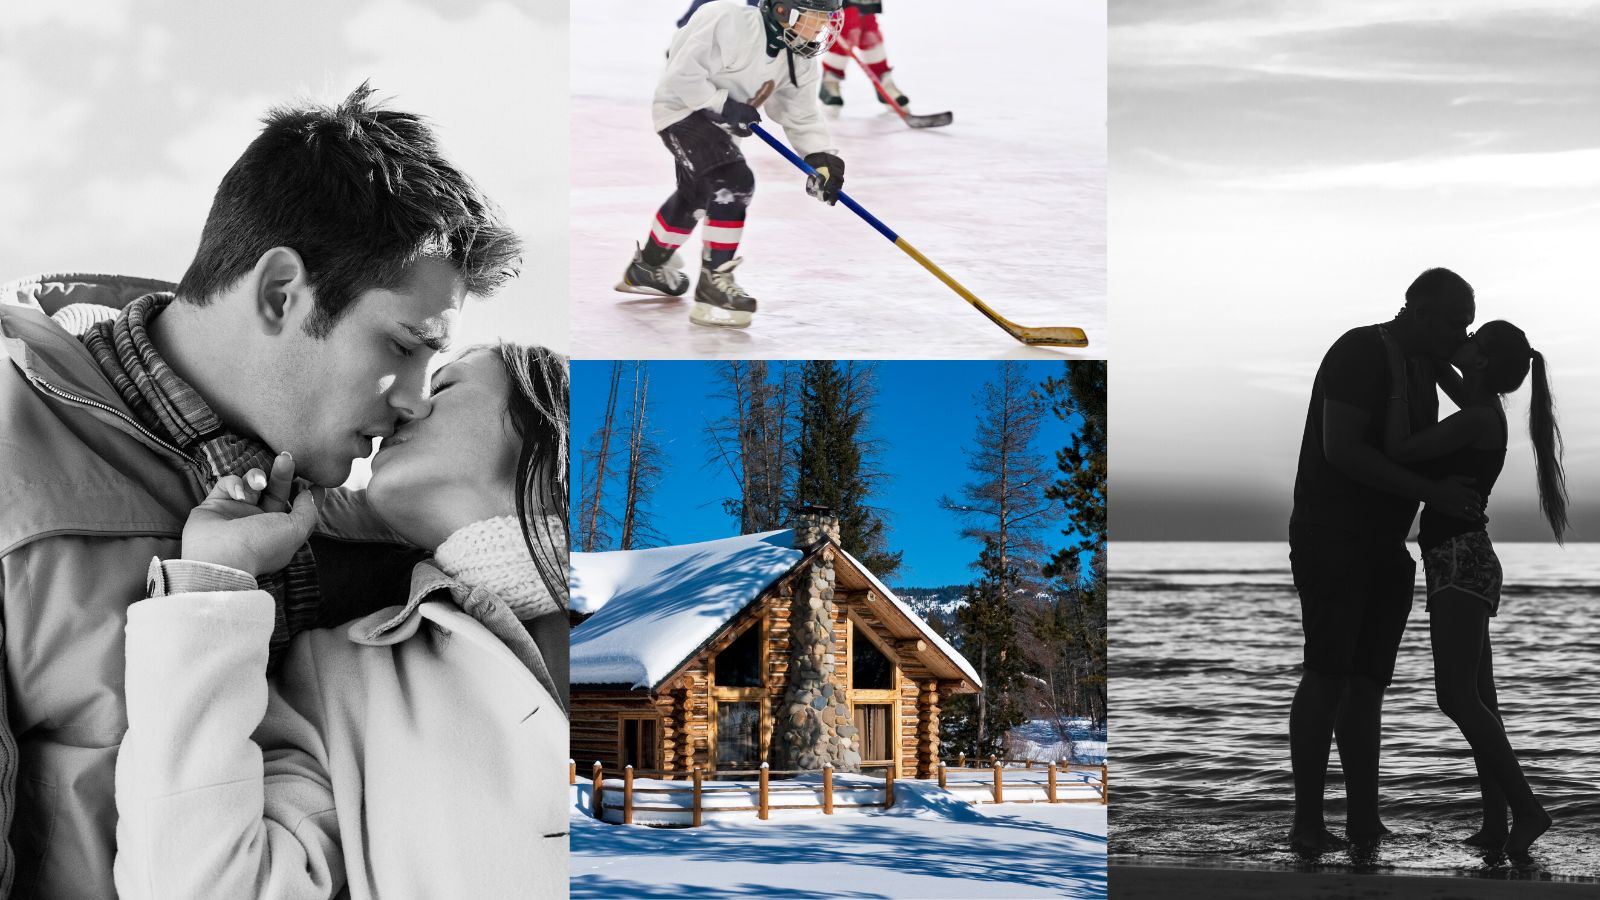 photo montage for the 10 years later bonus story. A couple kissing in winter, a girl playing hockey, a cabin in the forest, covered in snow, and a couple kissing next to the ocean at sunset.